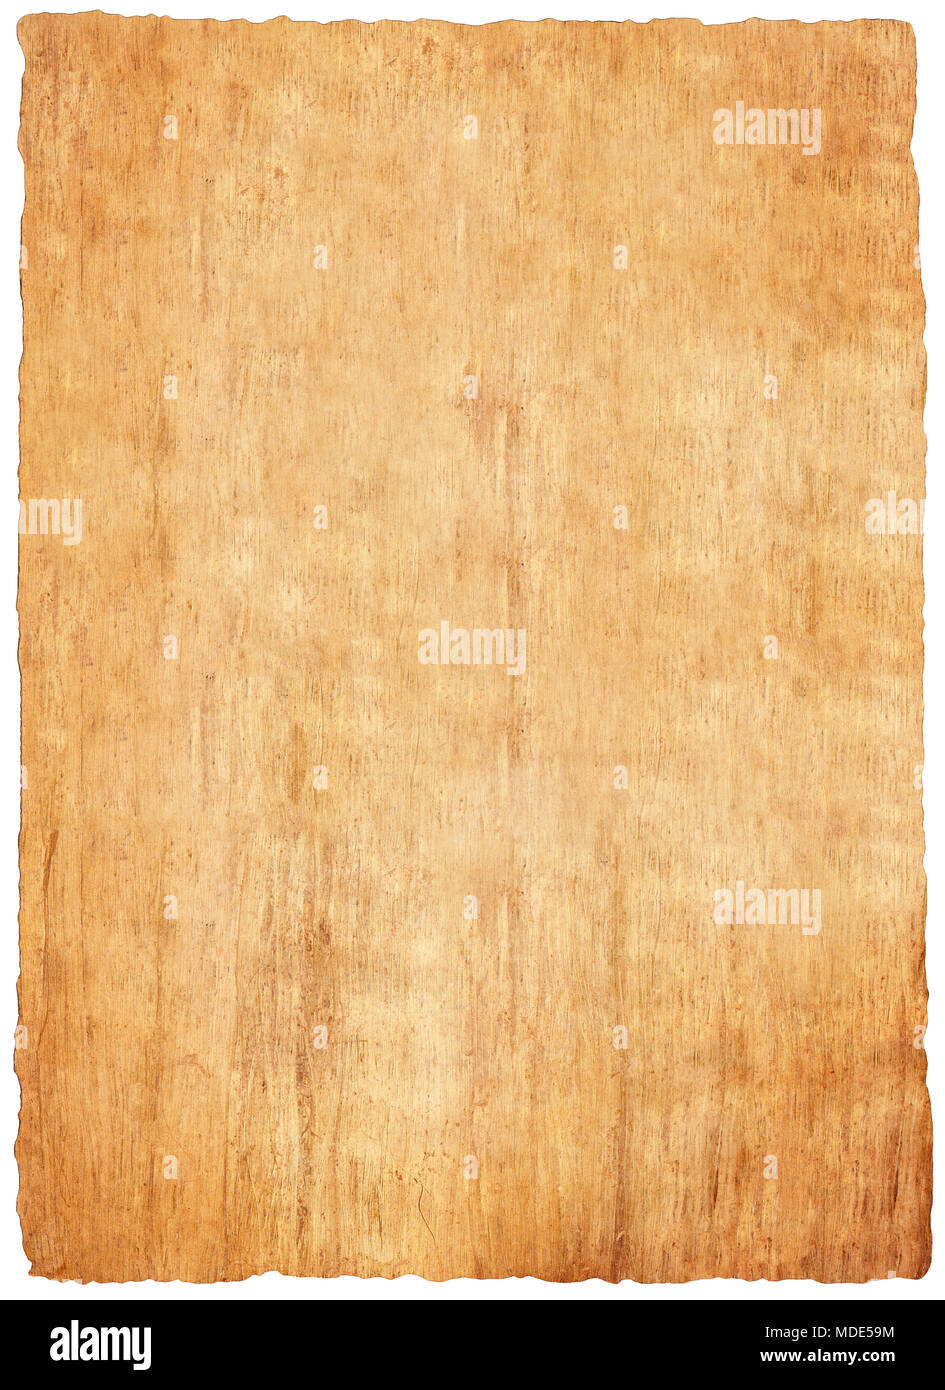 old papyrus paper background texture Stock Illustration